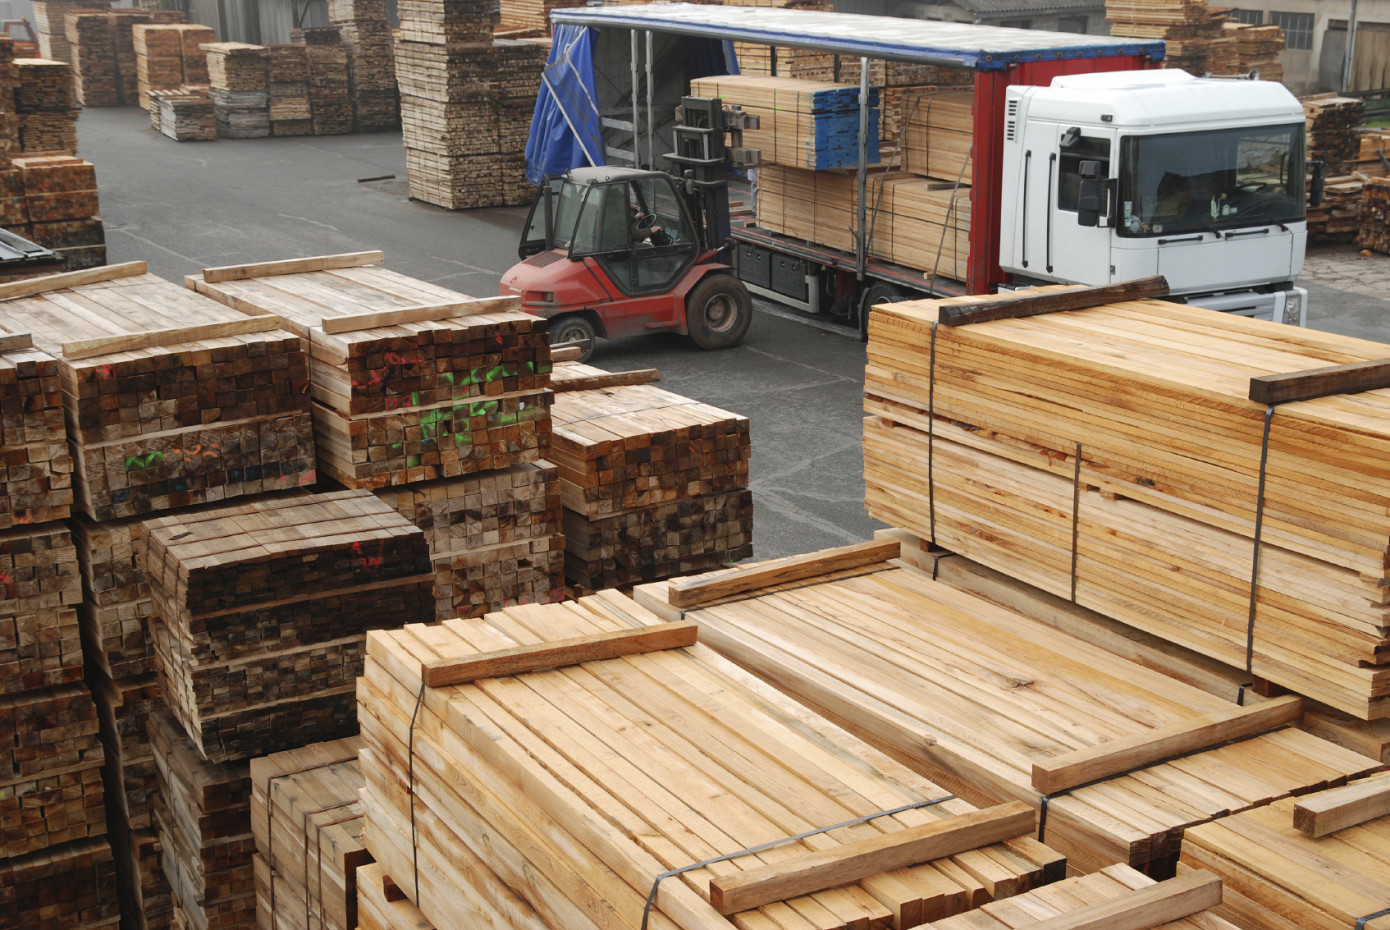 Soft demand brings lower lumber prices